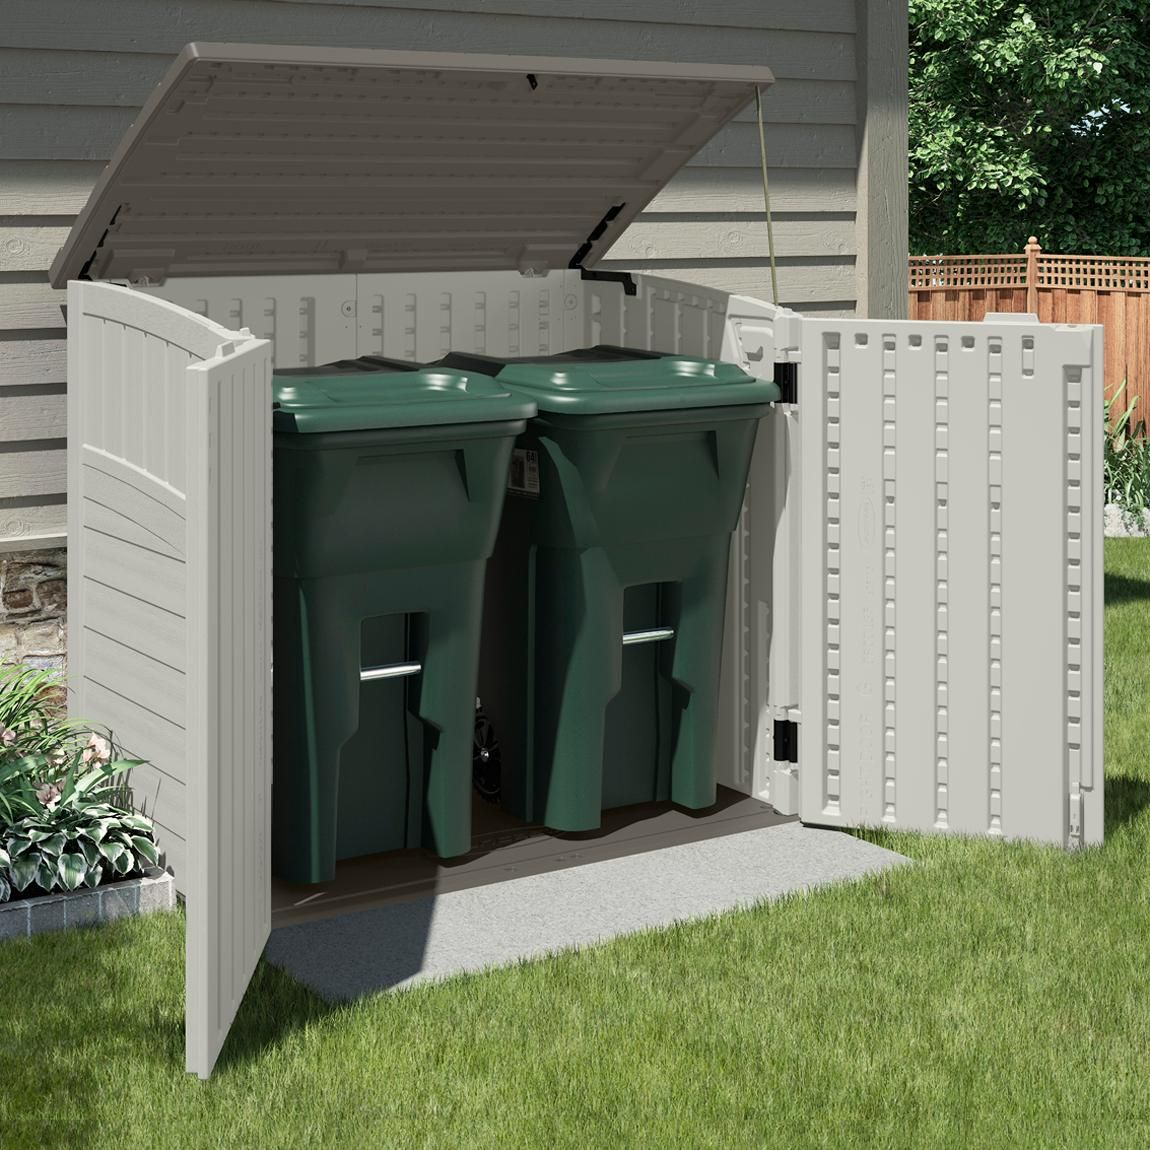 An Outdoor Storage Shed Is Ideal For Storing Garbage Cans Lawn And within sizing 1150 X 1150